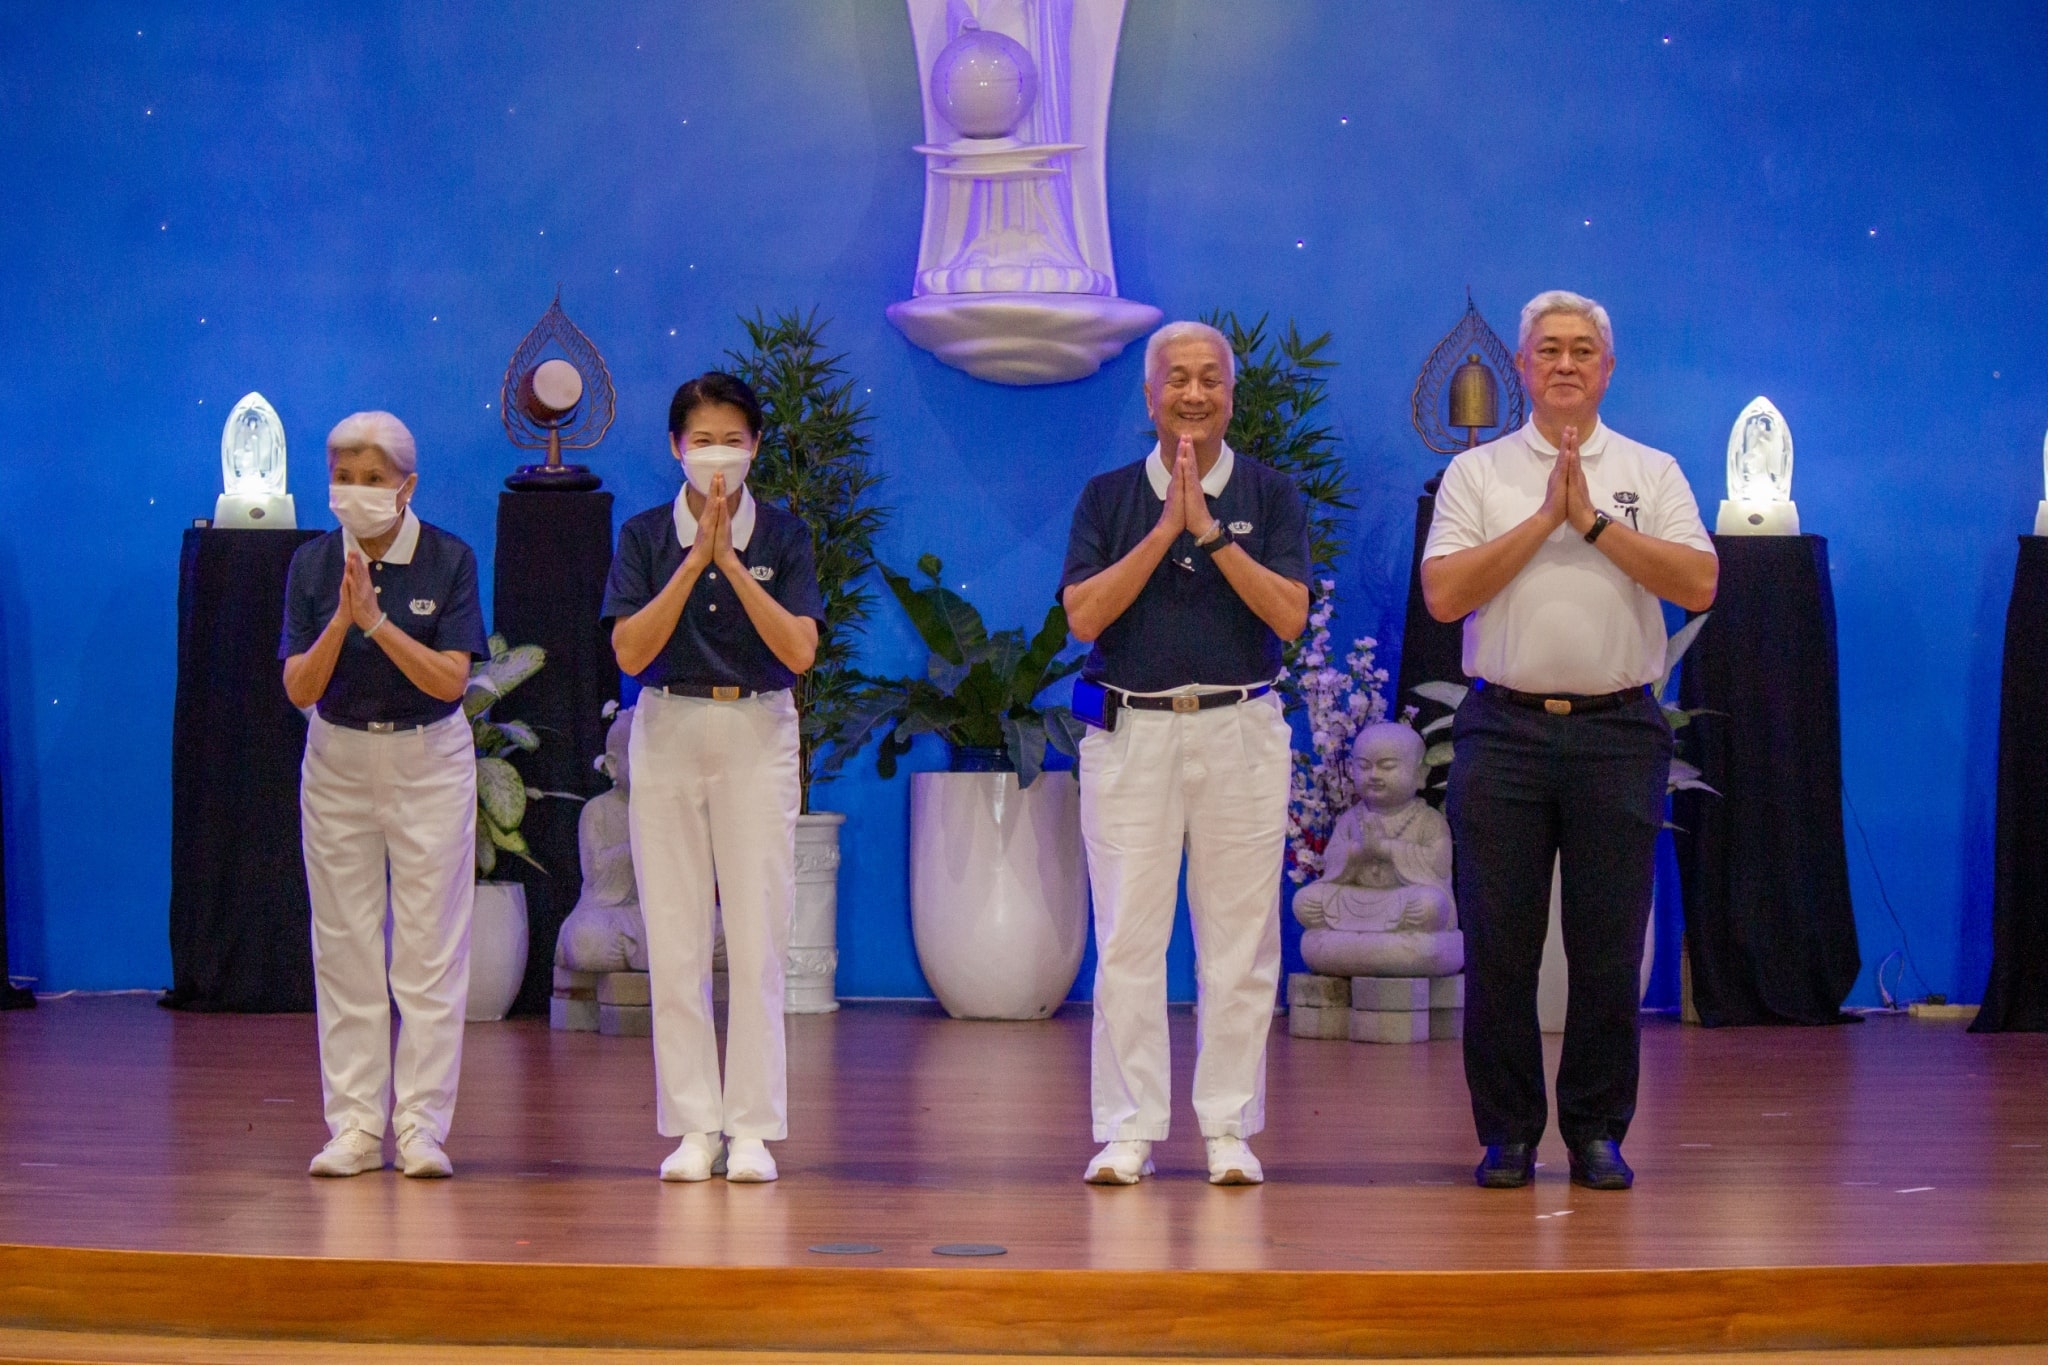 (From left) Tzu Chi Philippines’ first CEO Linda Chua, Tzu Chi Deputy CEO Woon Ng, Tzu Chi Philippines CEO Henry Yuñez, and Tzu Chi International Medical Association co-founder Dr. Jo Qua express gratitude to volunteers for making Tzu Chi Philippines the impactful organization it is today.【Photo by Marella Saldonido】